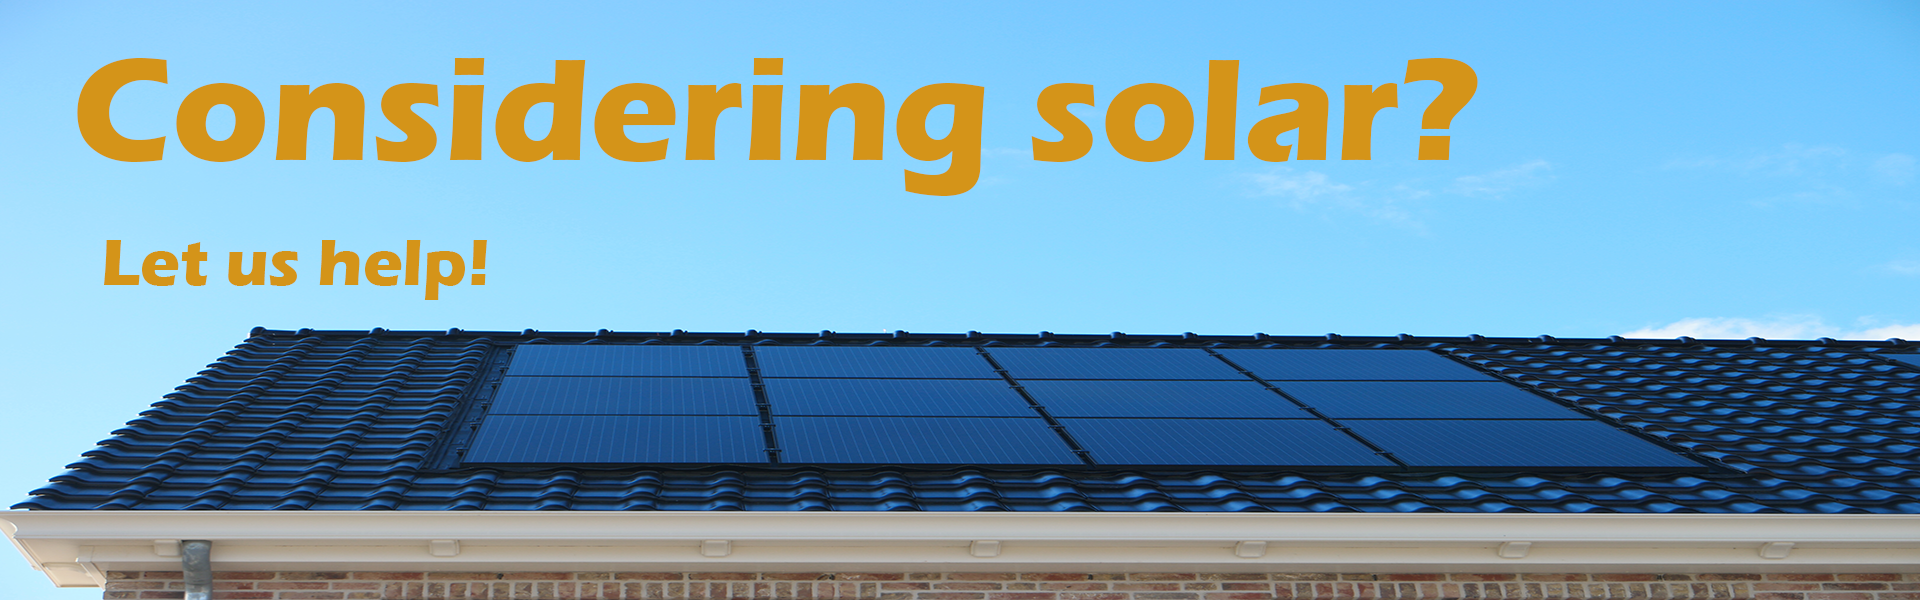 Slide of rooftop solar panels that links to our page about solar panel installations